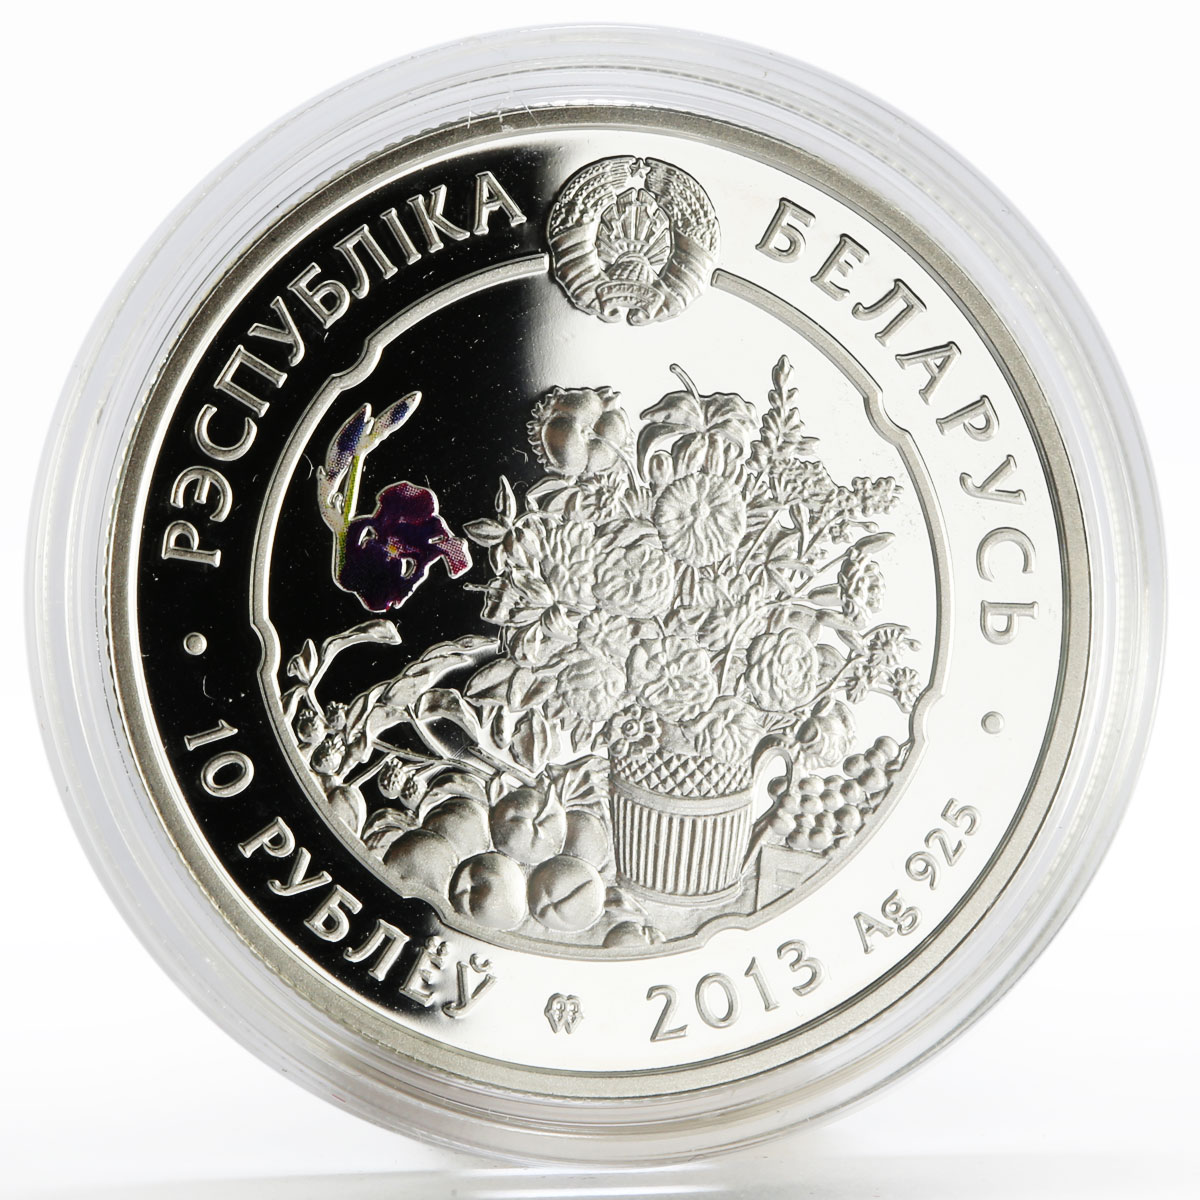 Belarus 10 rubles Beauty of Flowers series Carnation proof silver coin 2013